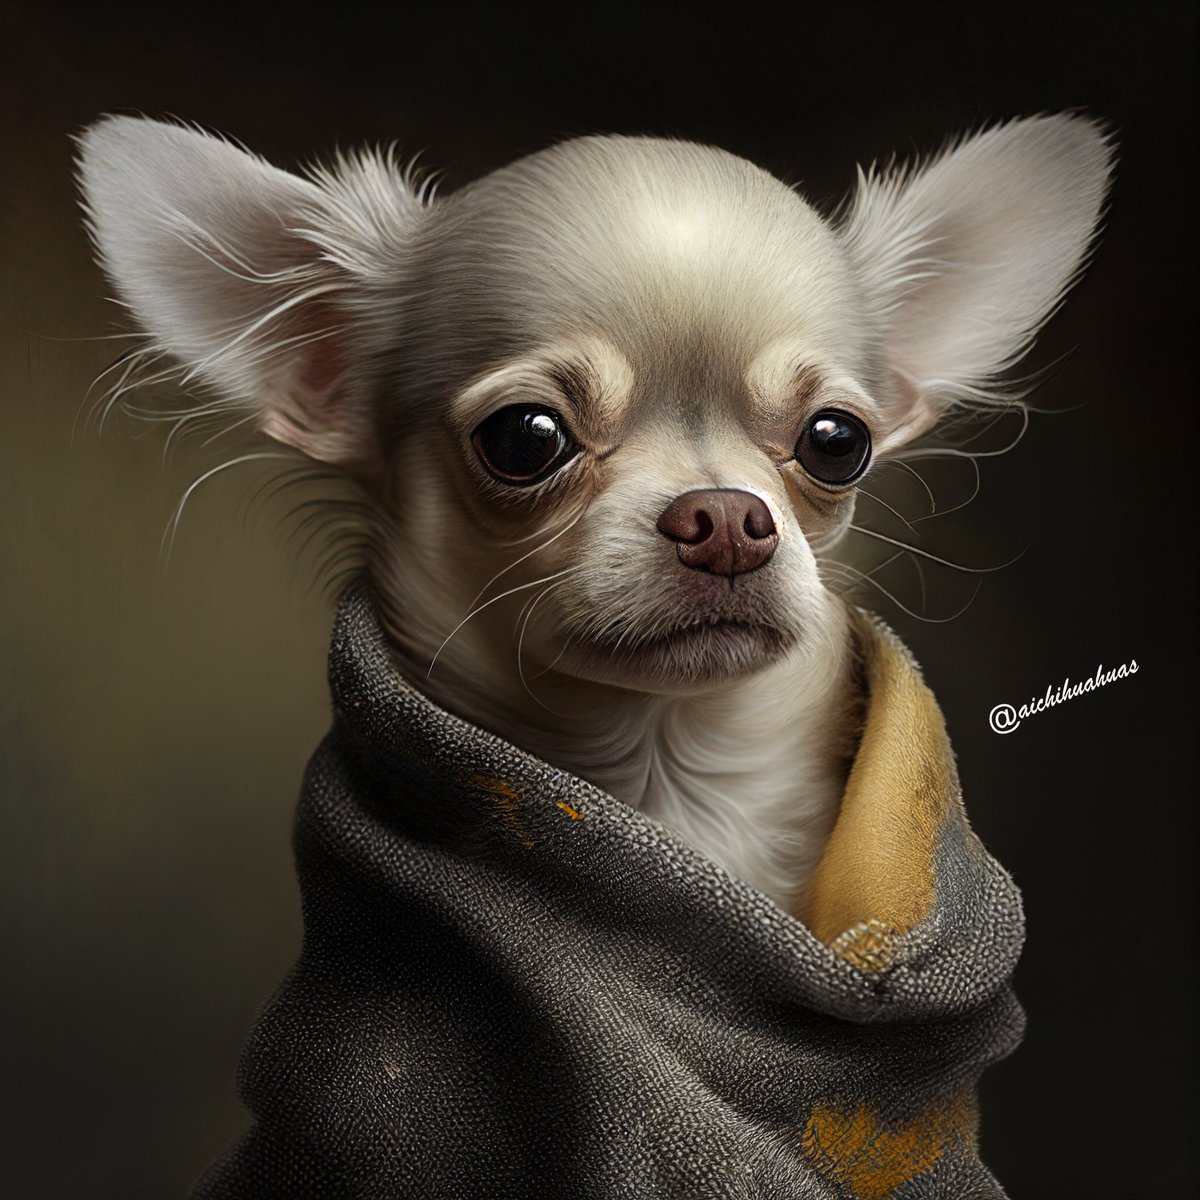 Get ready for a cuteness overload! This AI-generated chihuahua is too adorable for words 🐶💕 #AIpup #AiChihuahuas #Chihuahua #ChihuahuaLover #ChihuahuaLove #midjouney #midjourney #midjourneyart #AIart